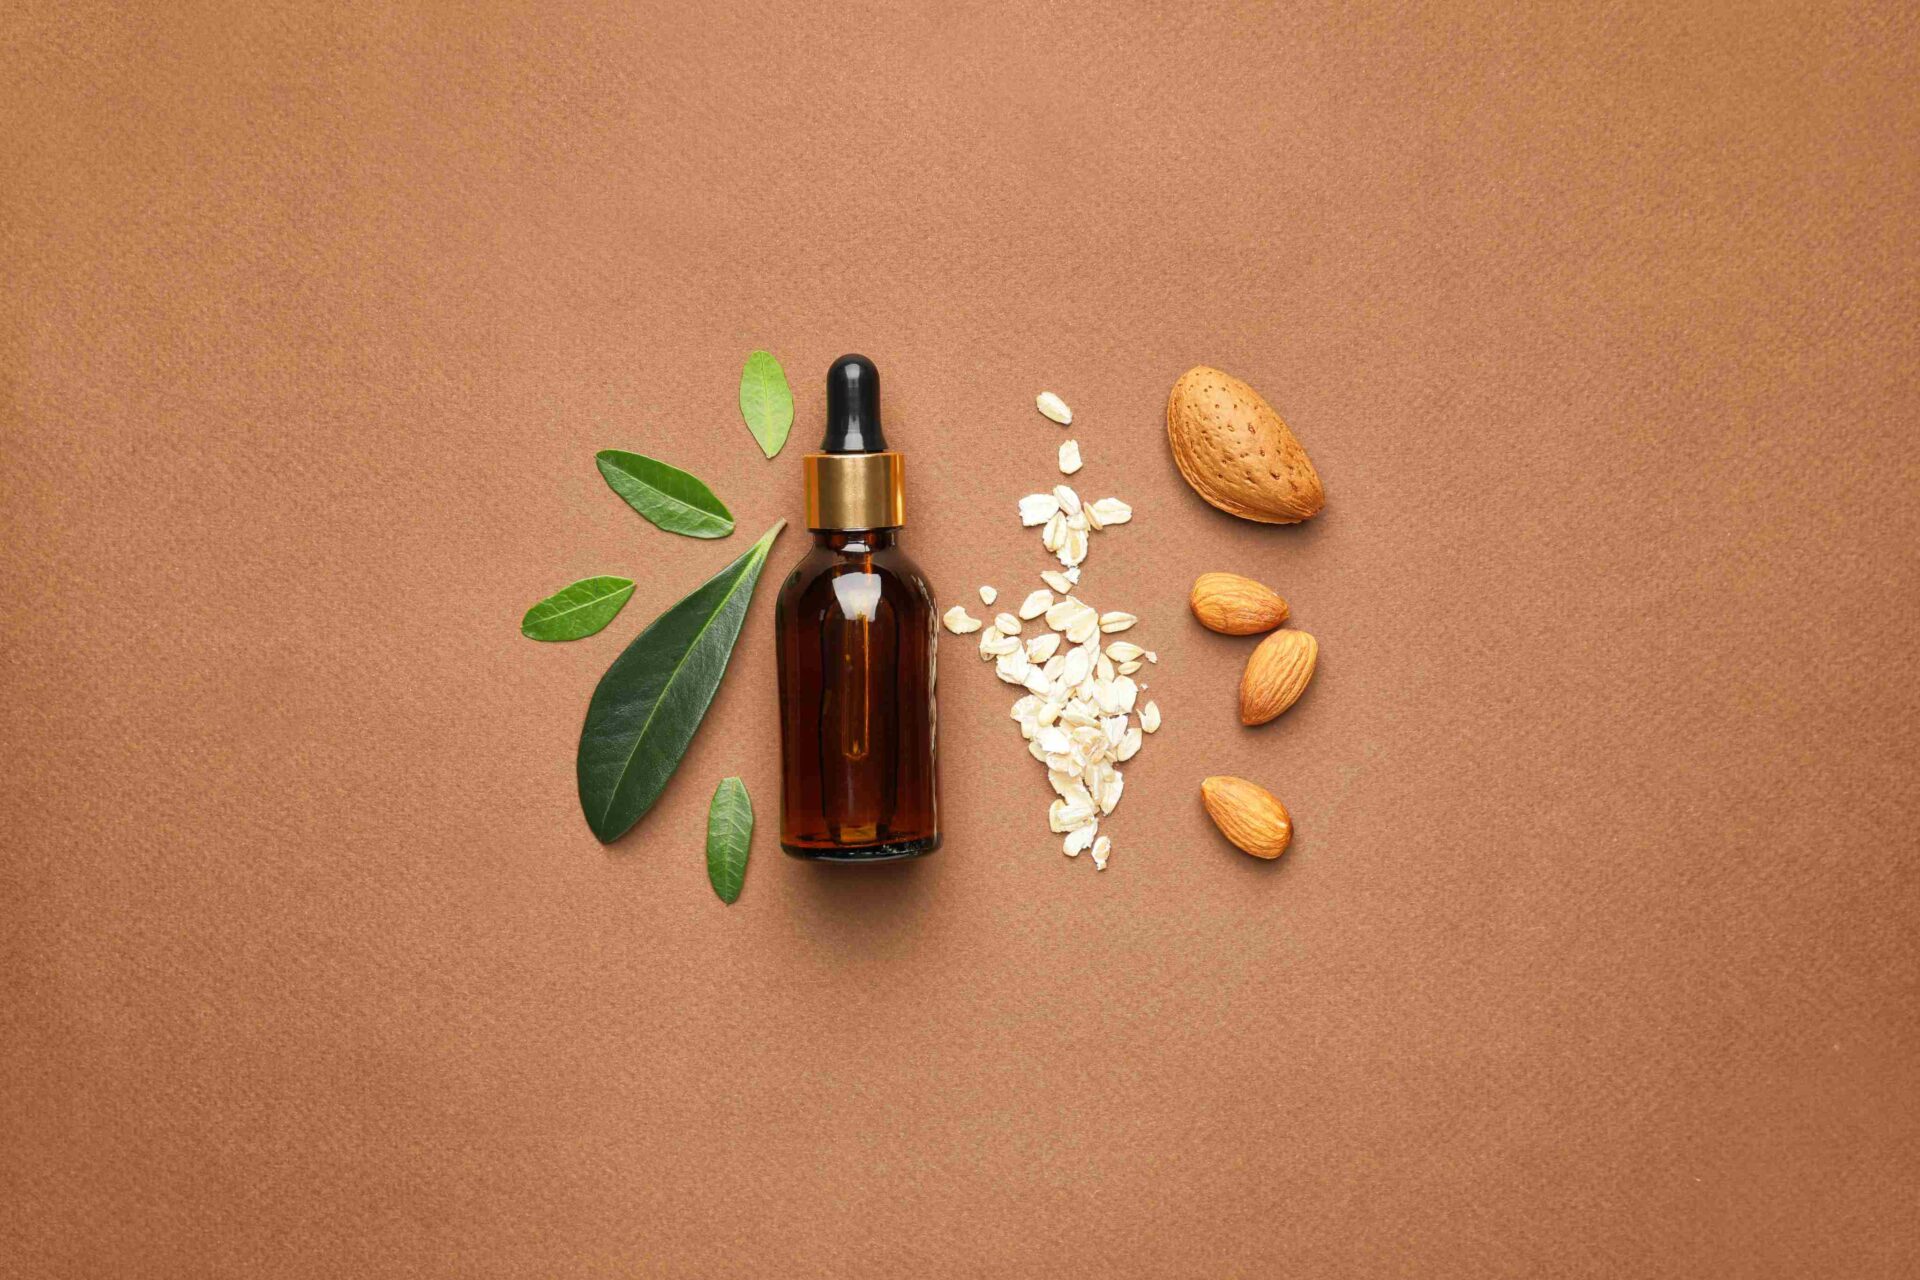 A Bottle of Almond Oil Face Serum Lined up Next to Leaves and Almonds - Almond Oil in Cosmetics and Beauty Products